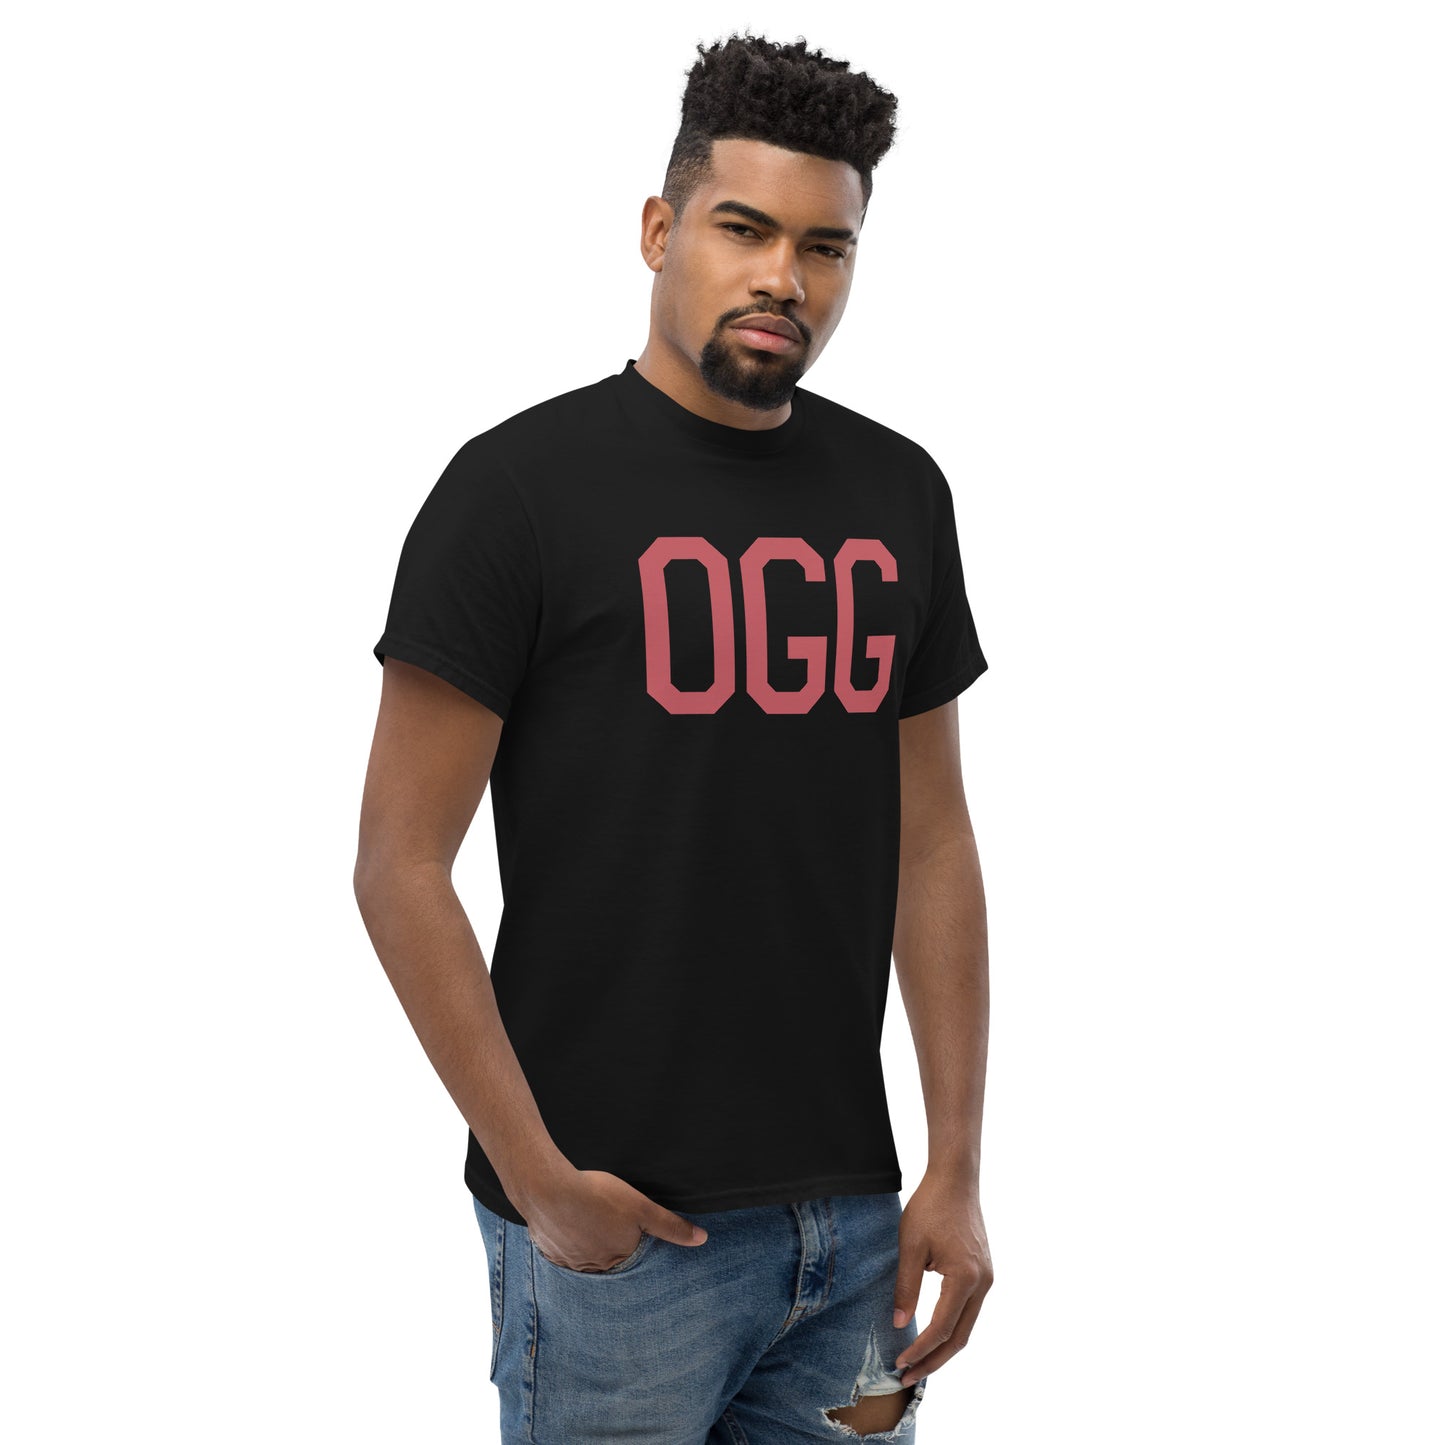 Aviation Enthusiast Men's Tee - Deep Pink Graphic • OGG Maui • YHM Designs - Image 08